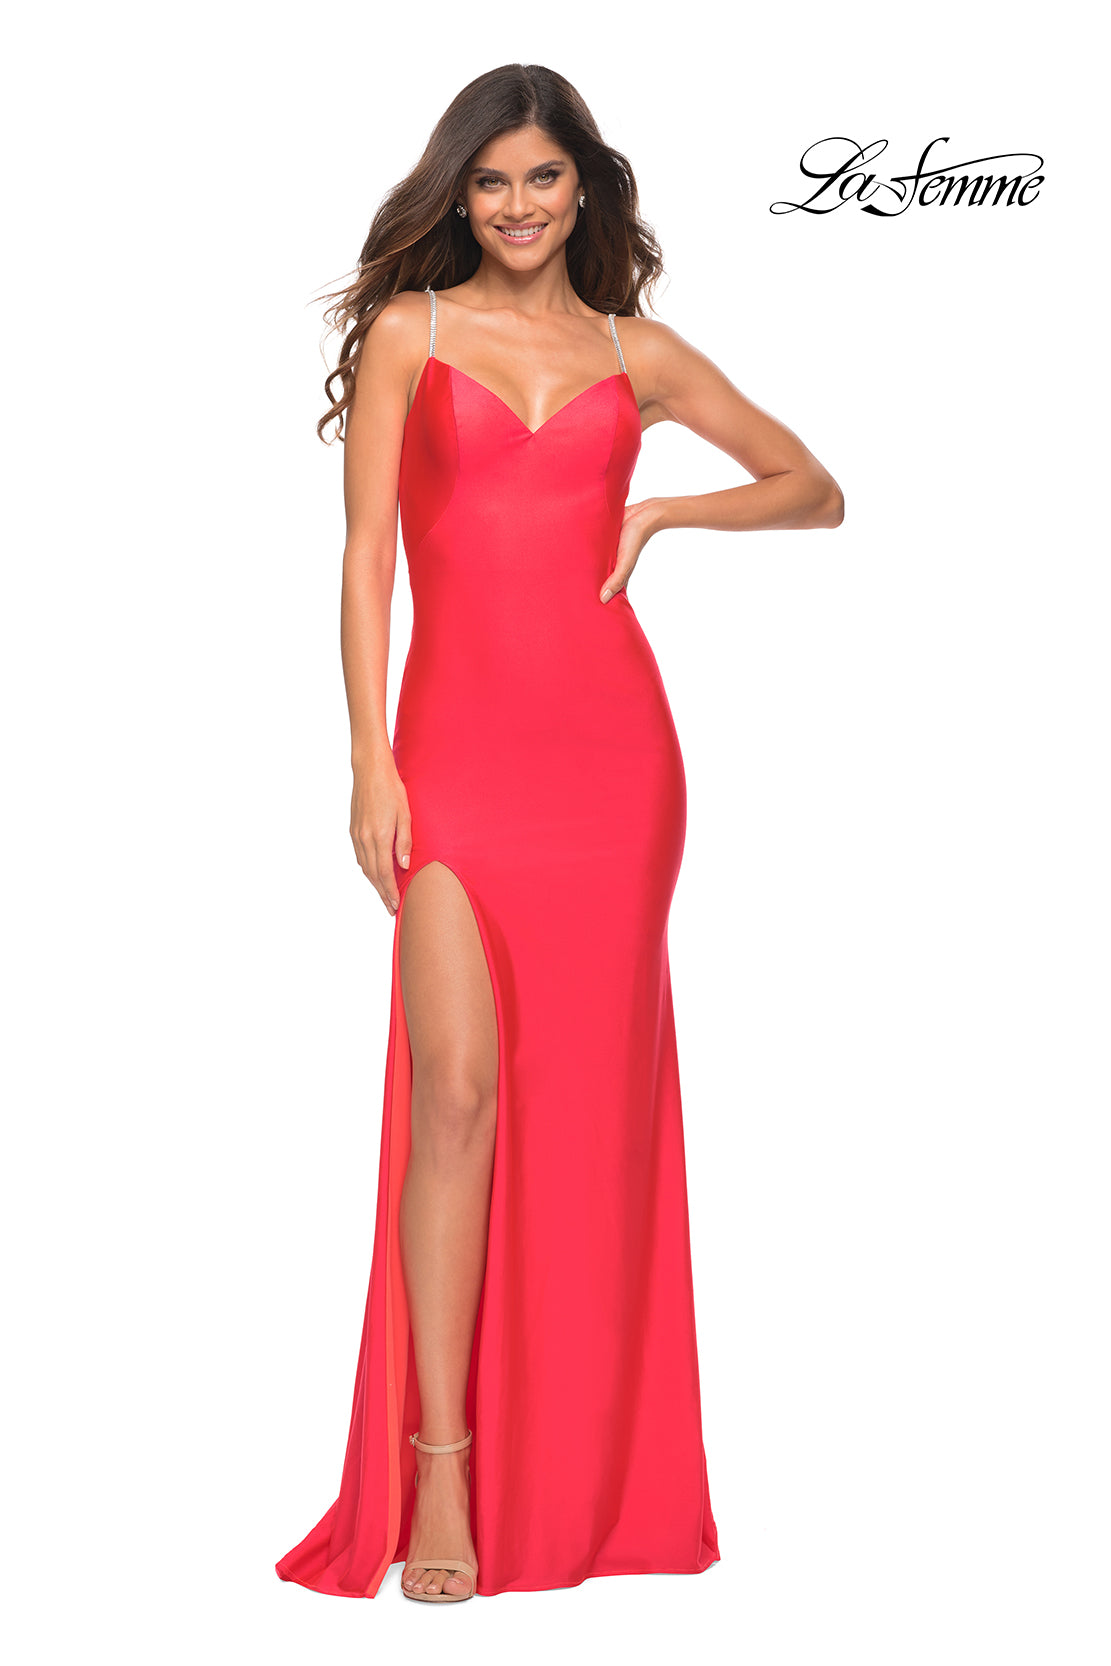 La Femme 30602 Sweetheart Gown with Rhinestone Straps with Leg Slit